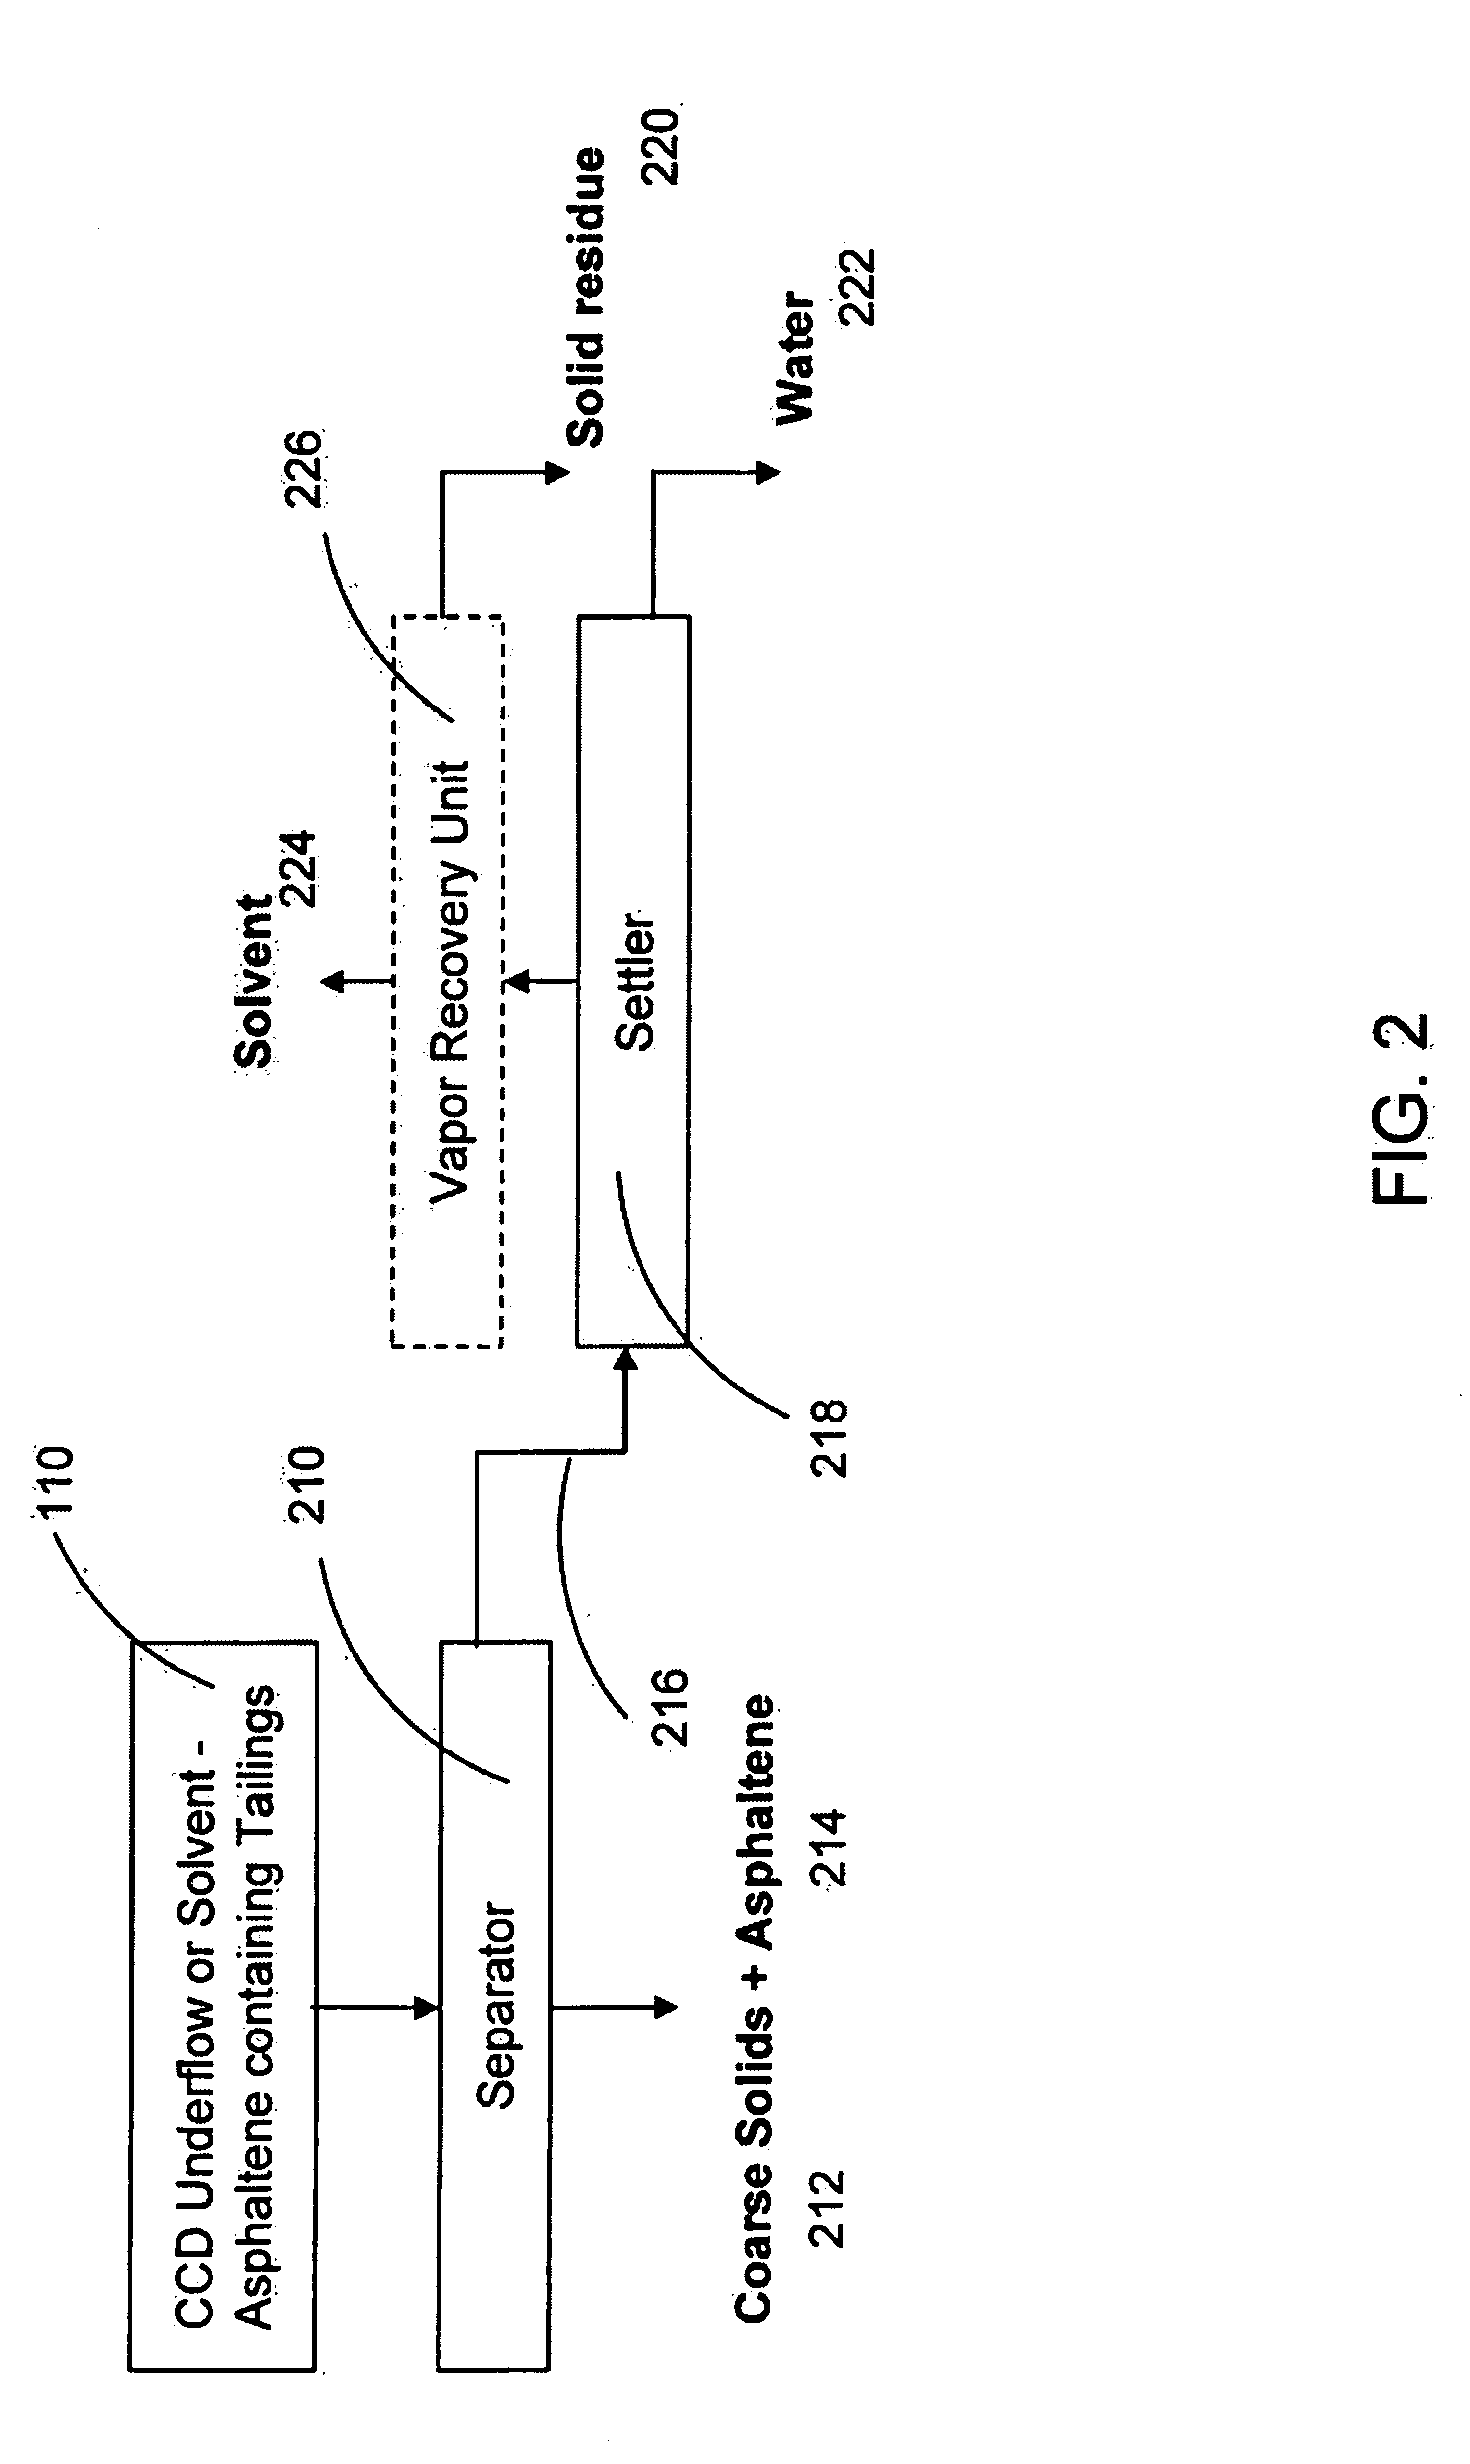 Separation of tailings that include asphaltenes